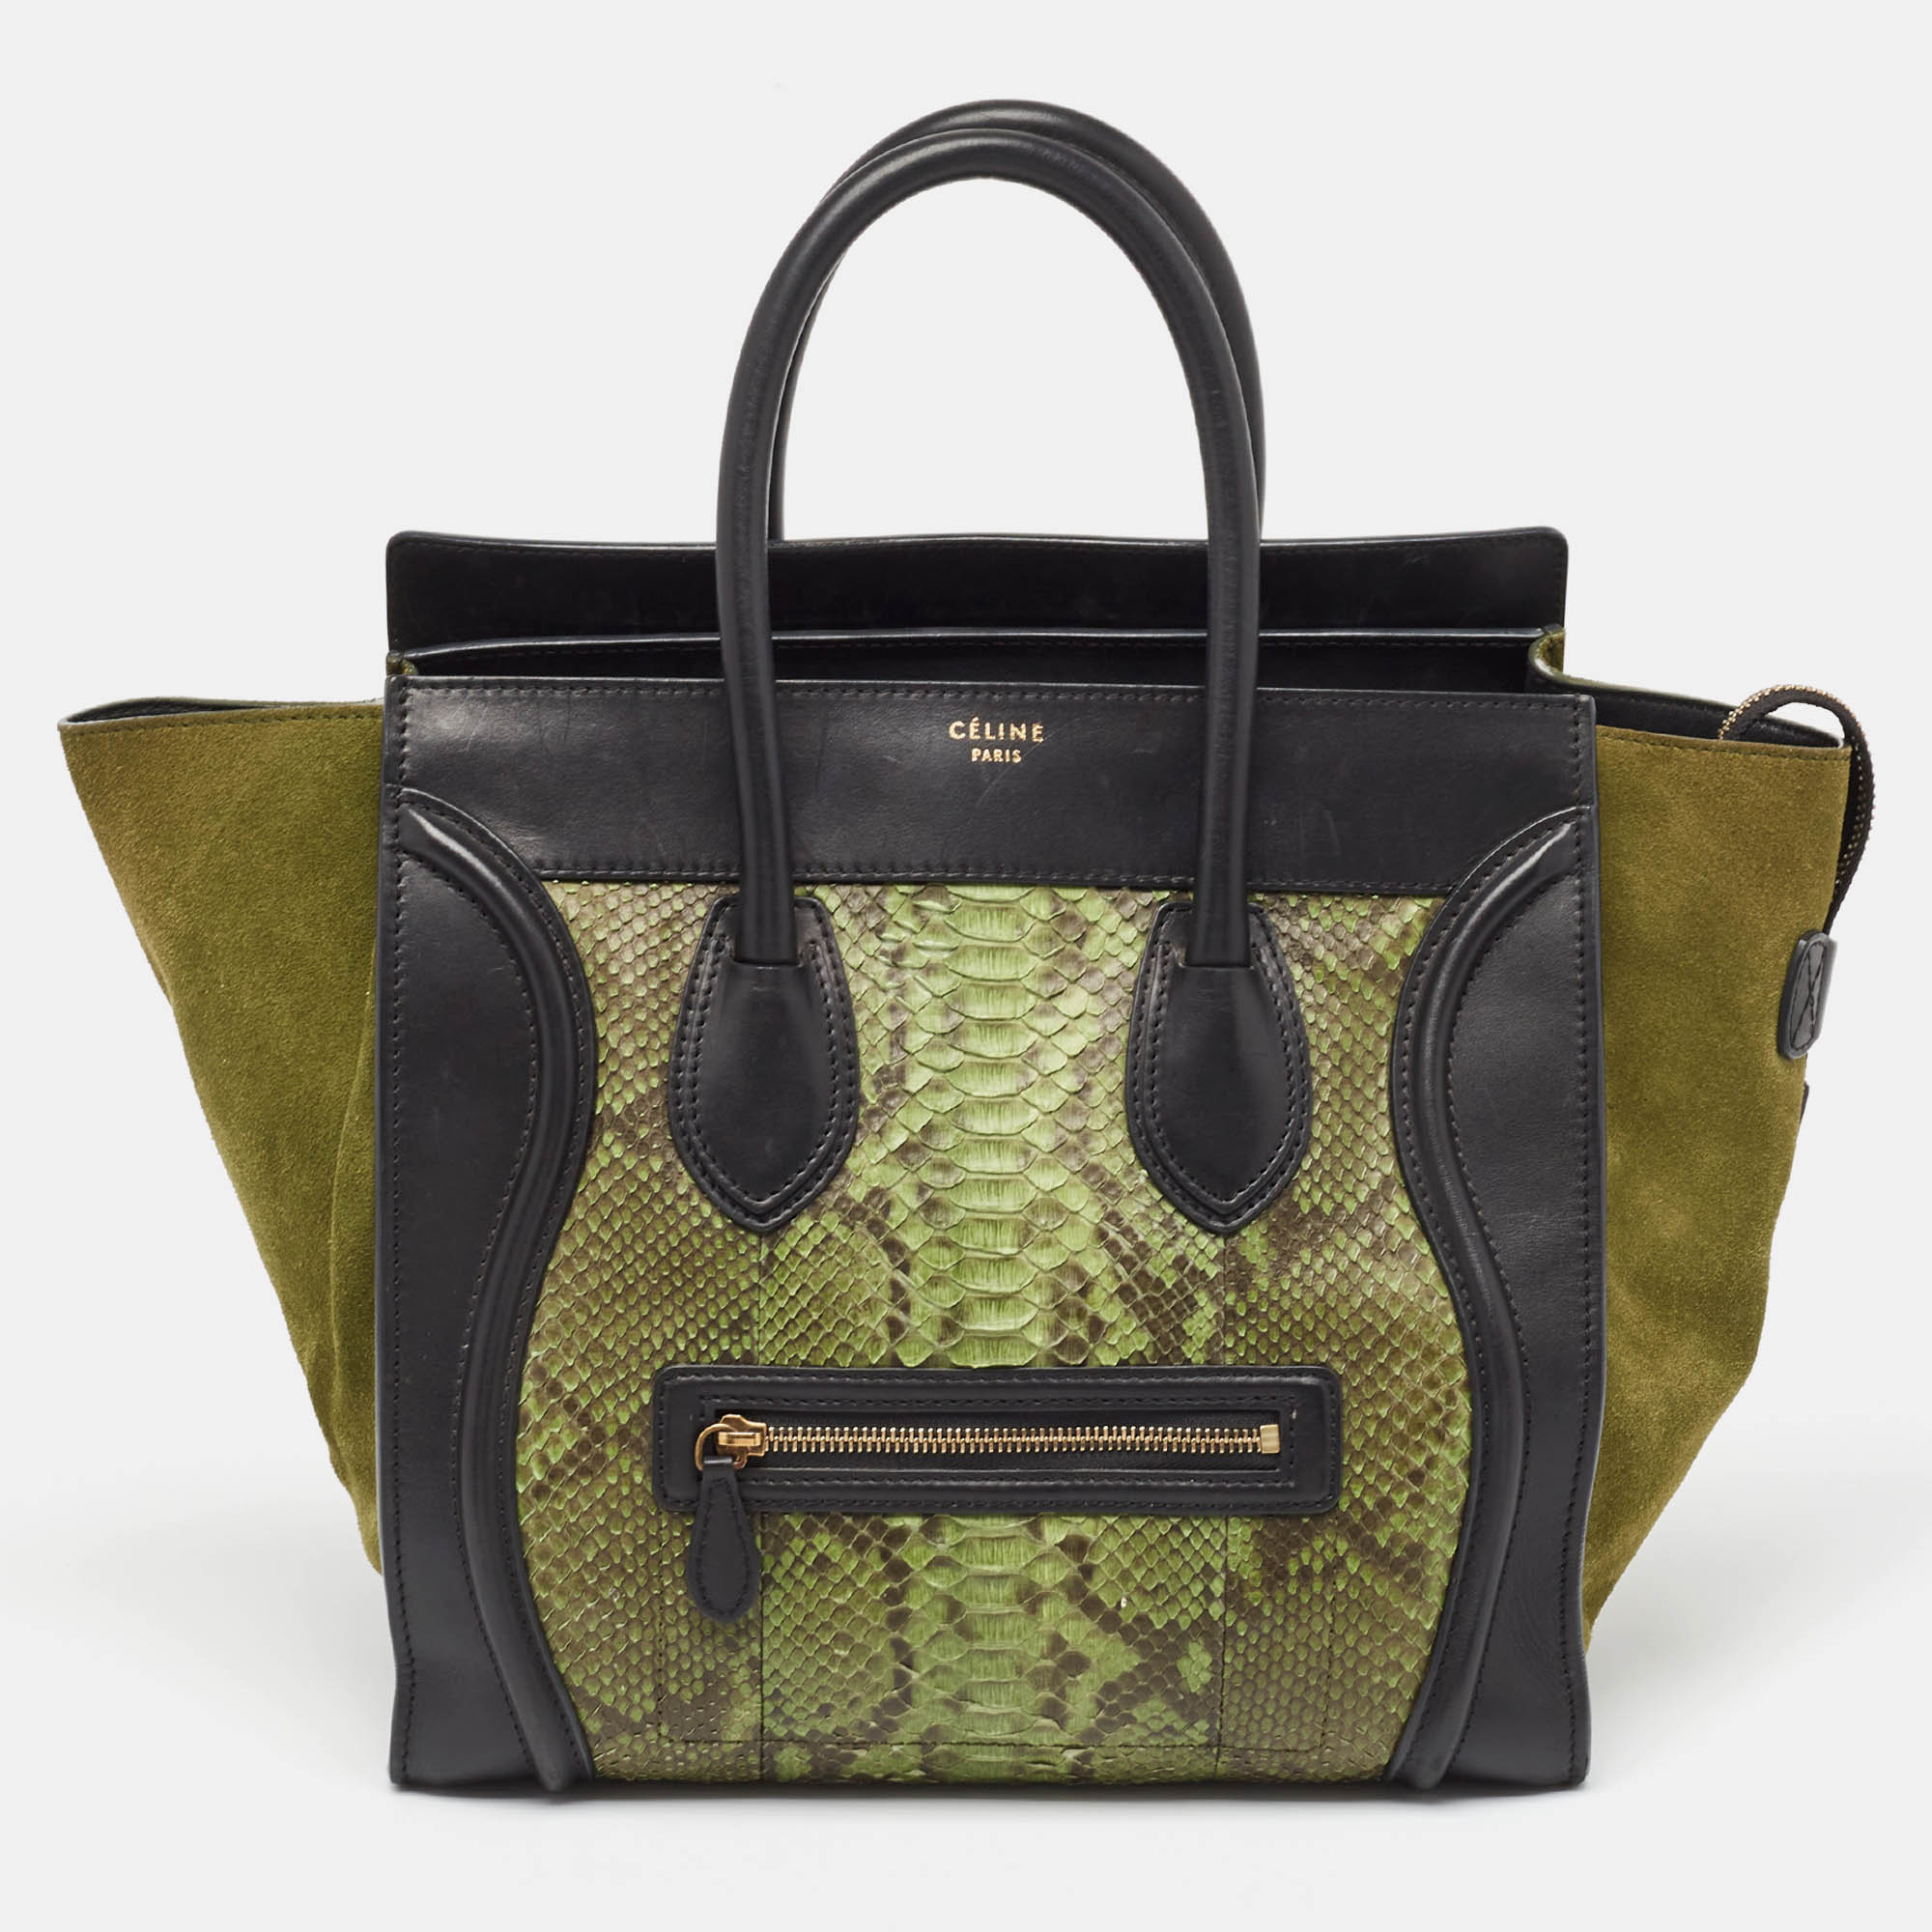 Celine Black/Green Python and Leather/Suede Mini Luggage Tote